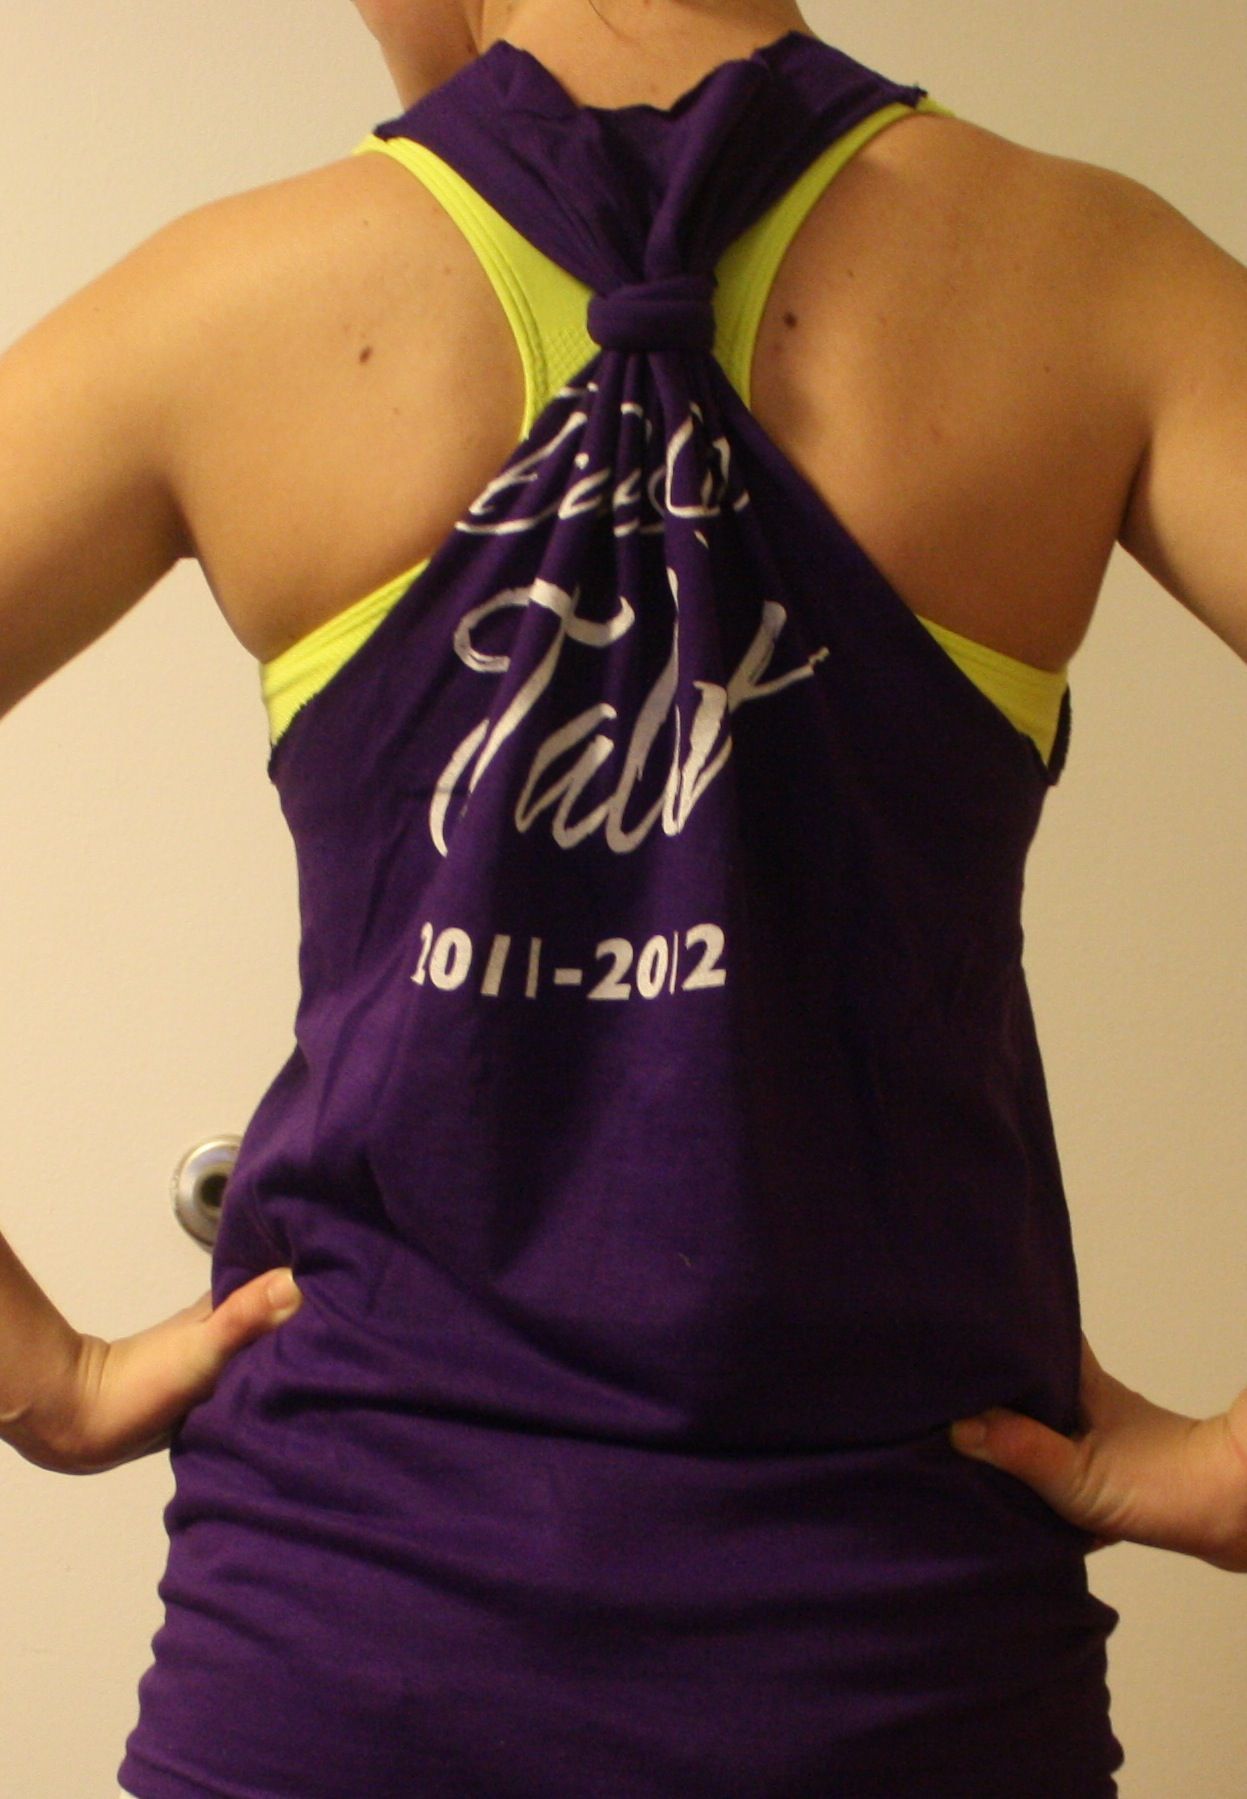 Recycle old t-shirts into cute workout tanks!  I have about 1,000 old t-shirts a